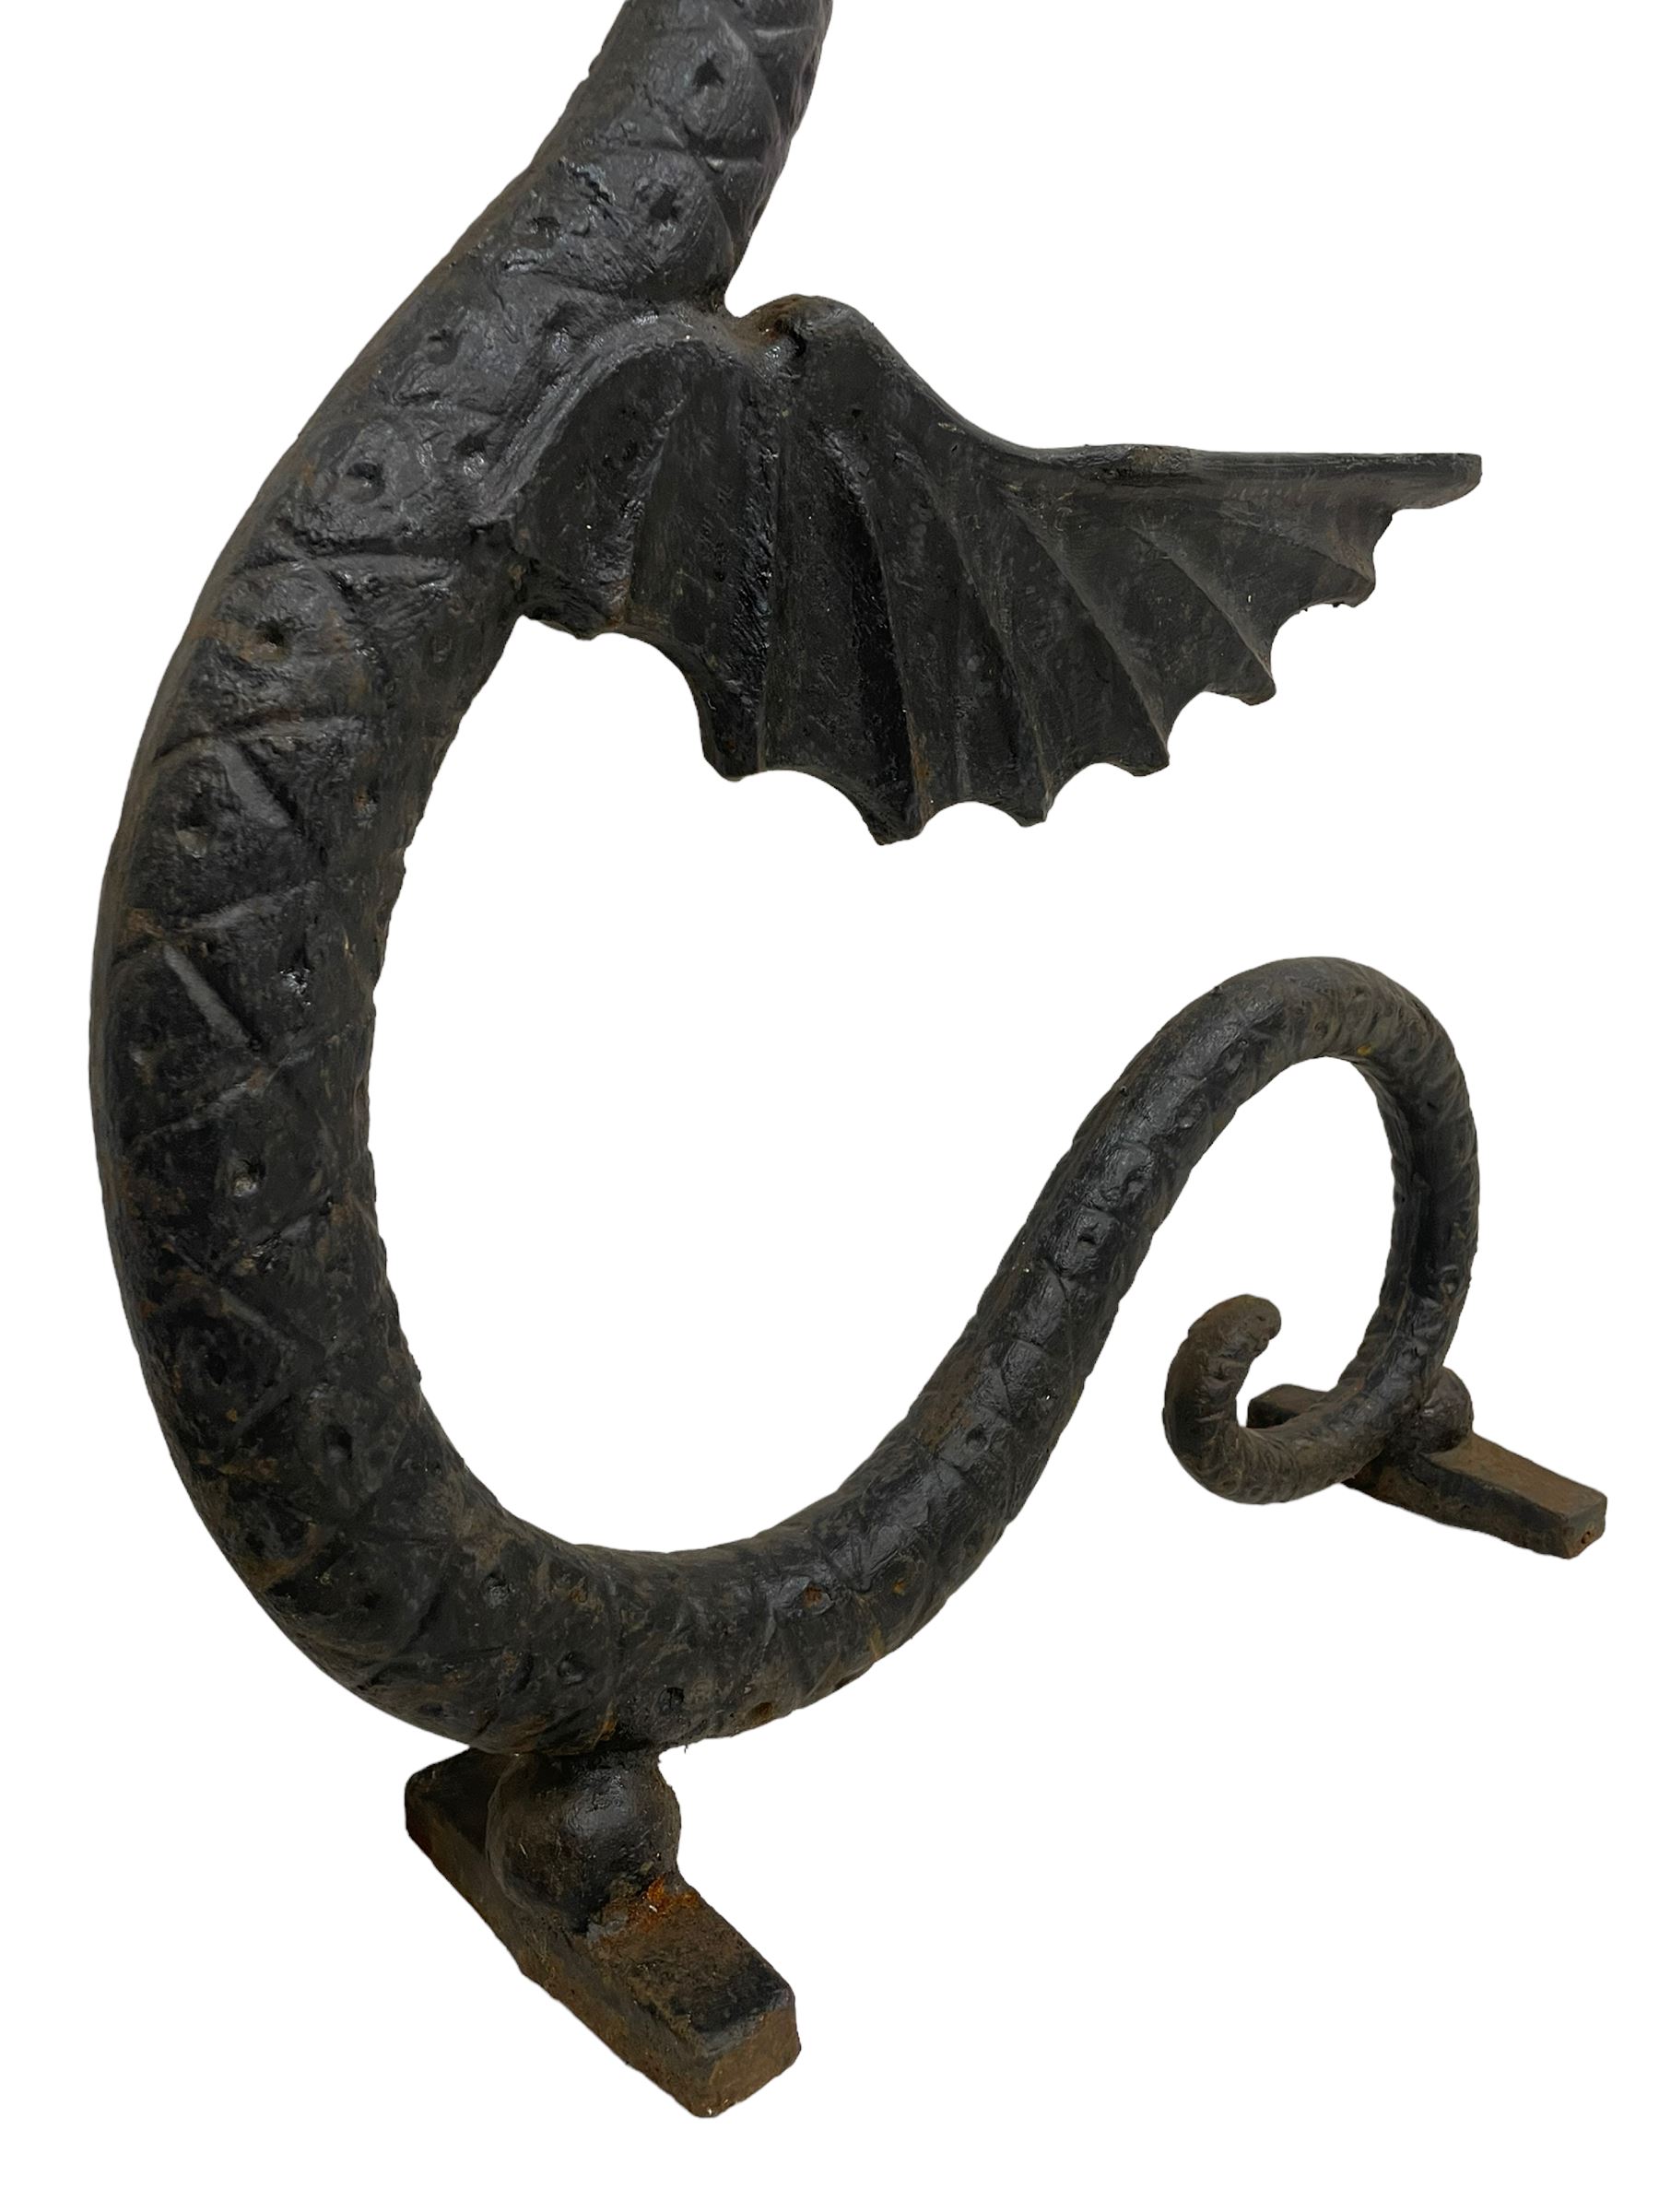 Cast iron bench ends in the form of winged dragons - Image 5 of 6